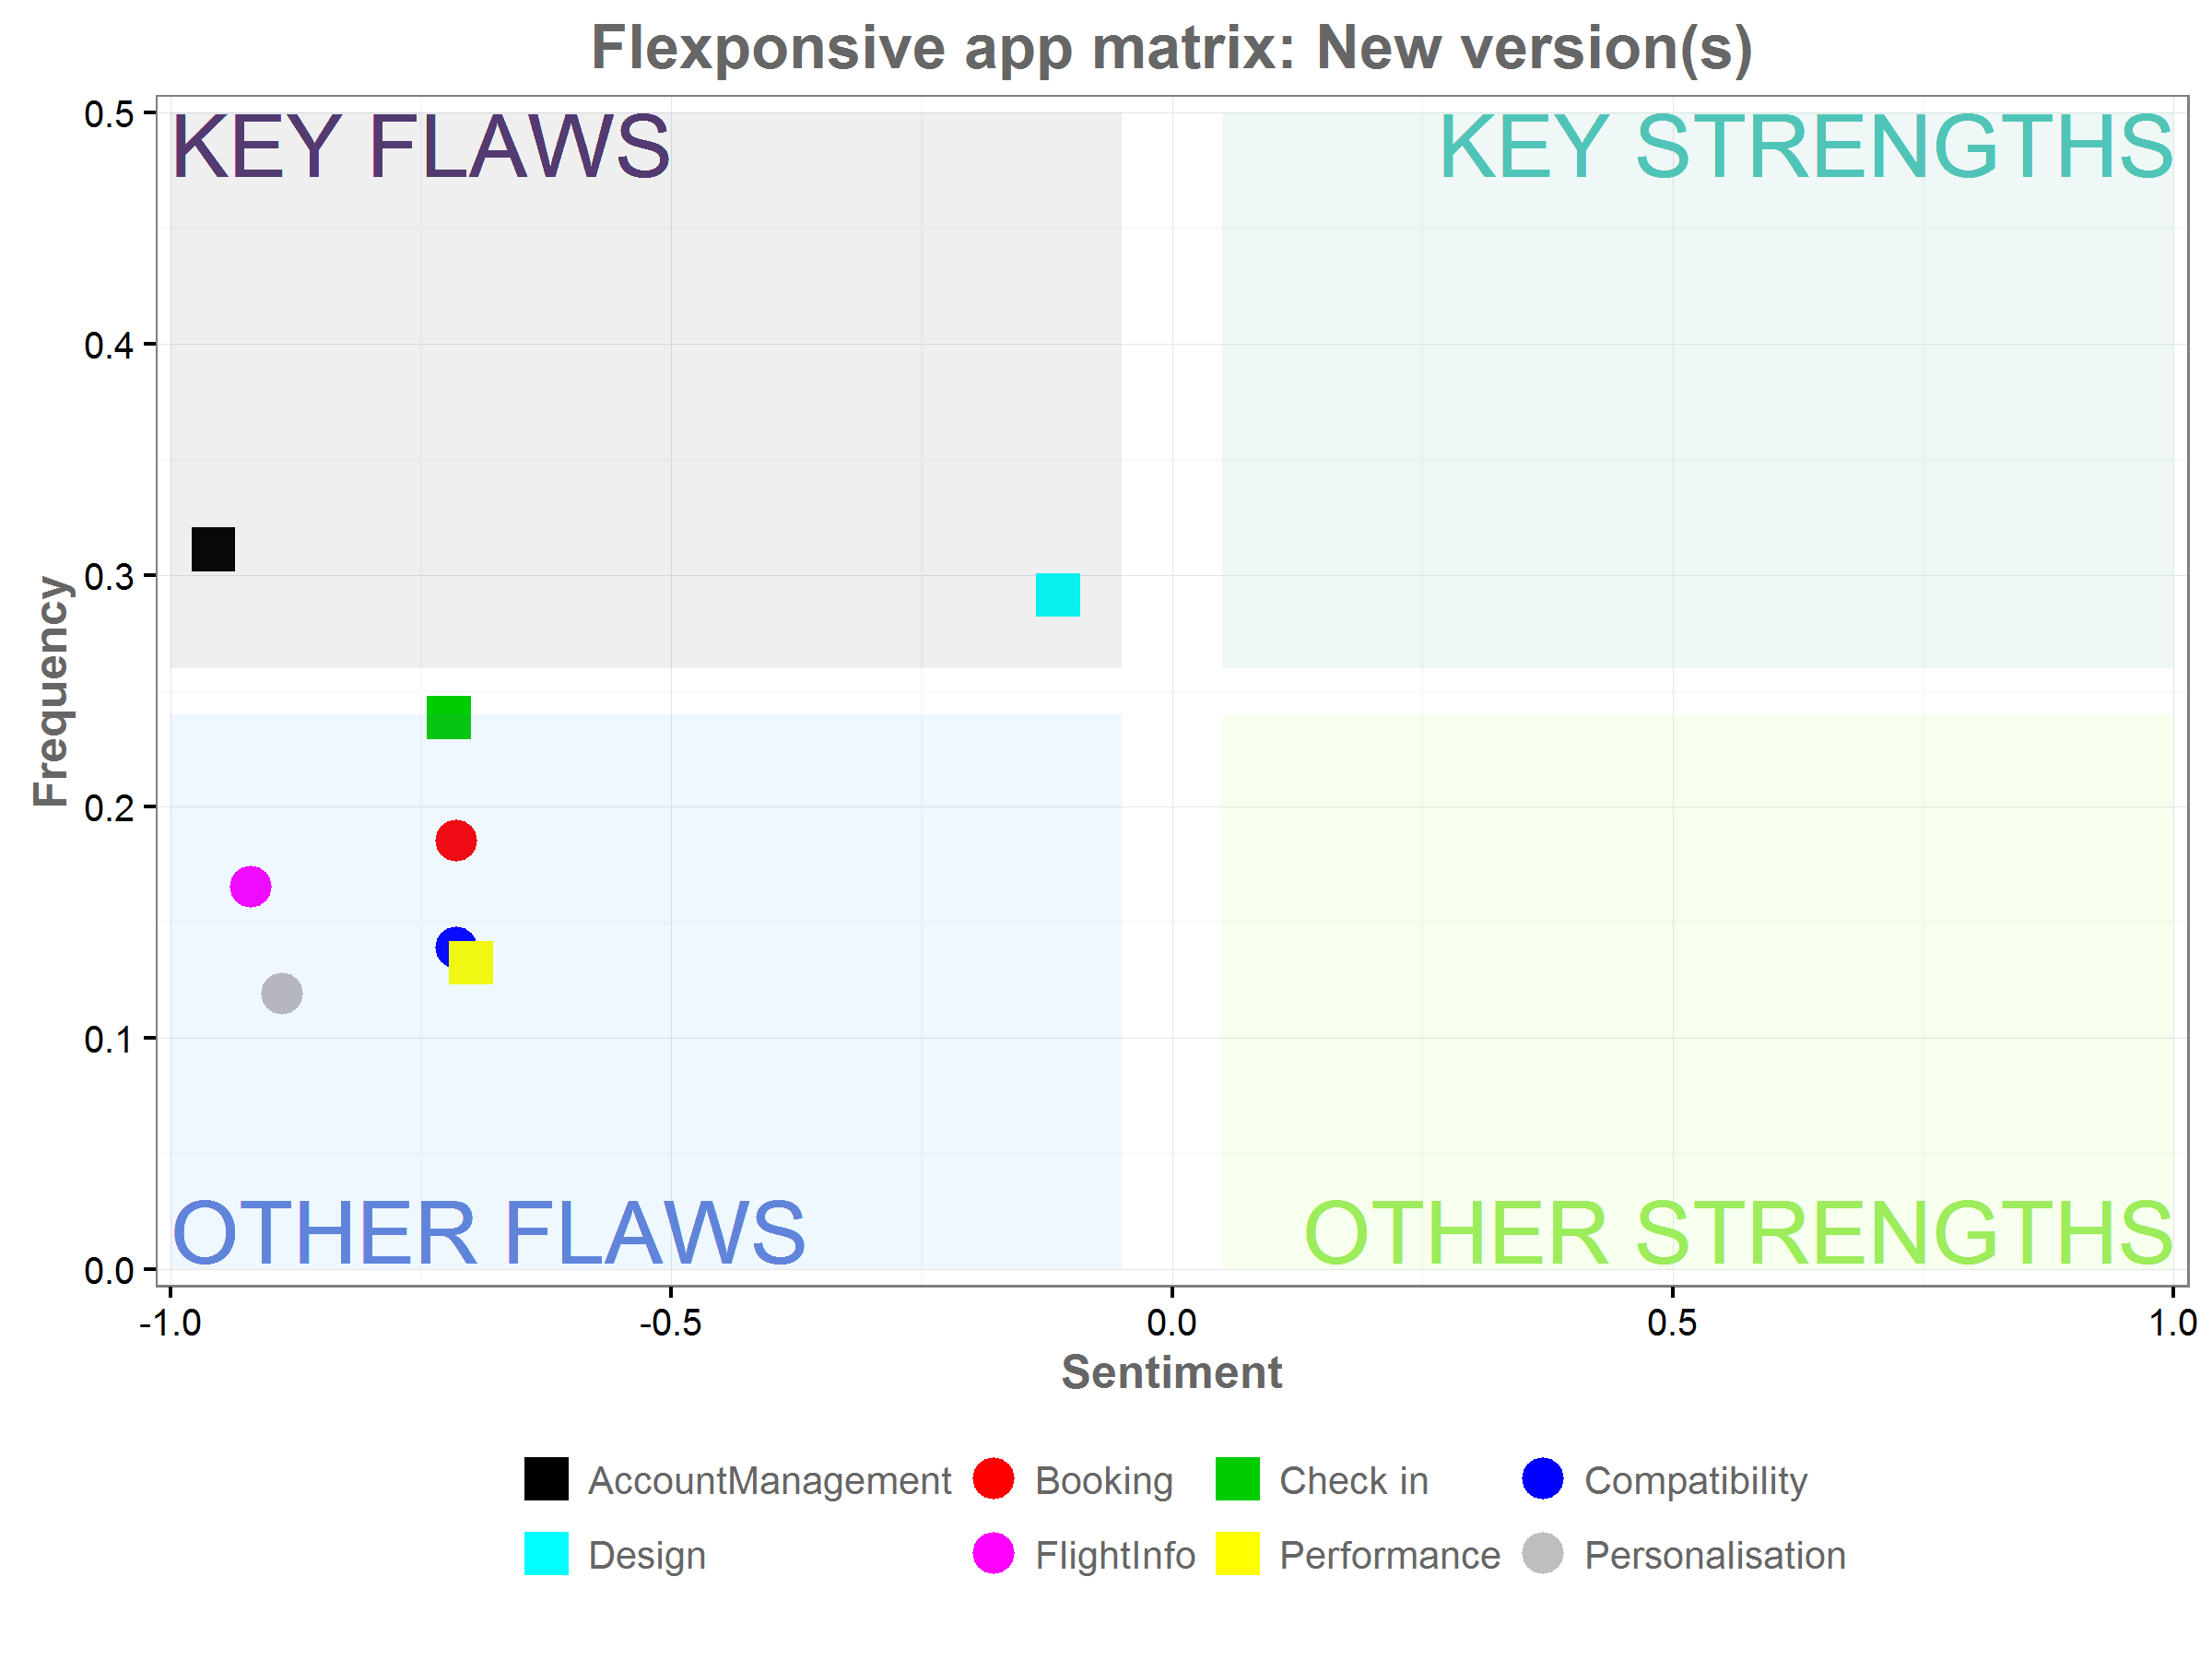 A graph with 4 sections, showing the flaws and strengths of the new app.